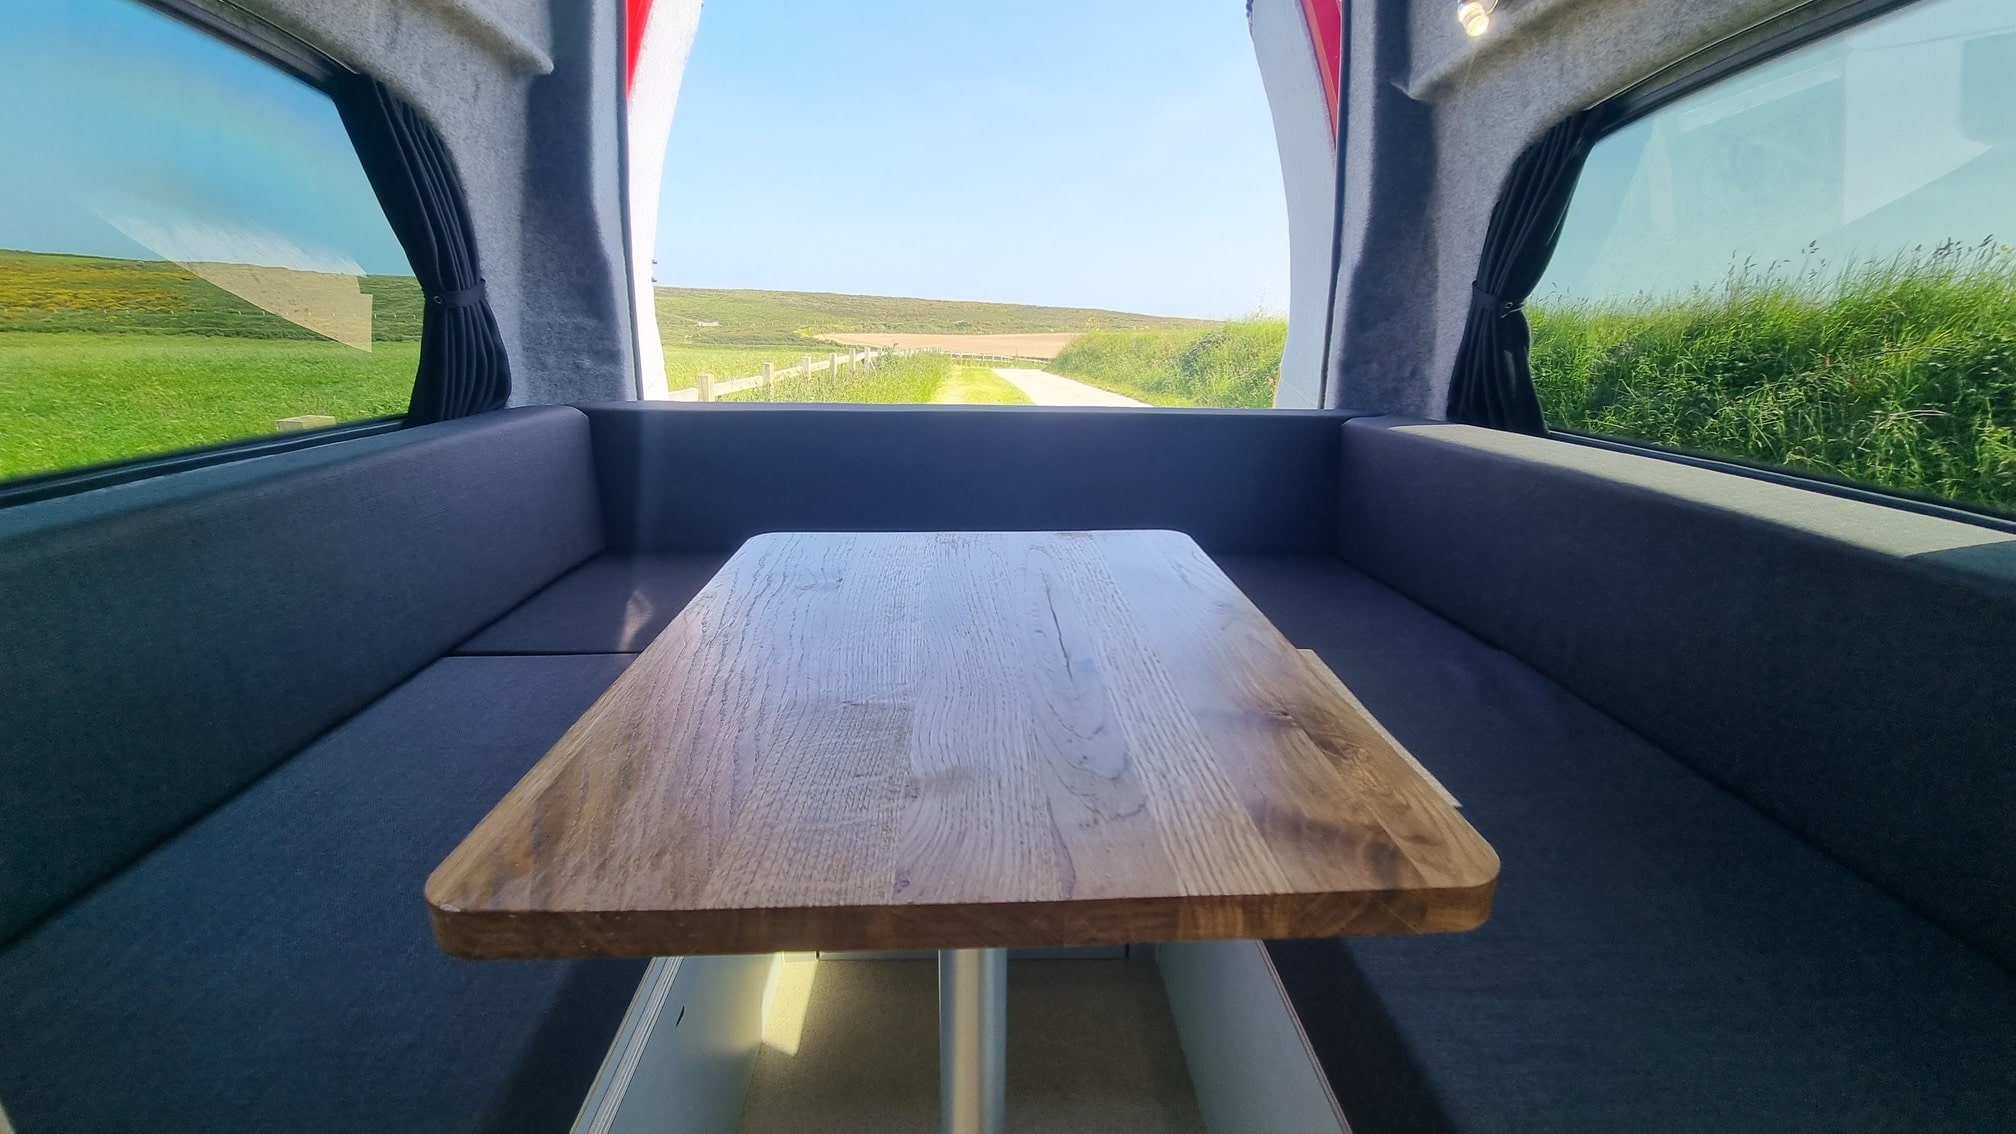 Mercedes Vito Campervan Conversion Round the Table